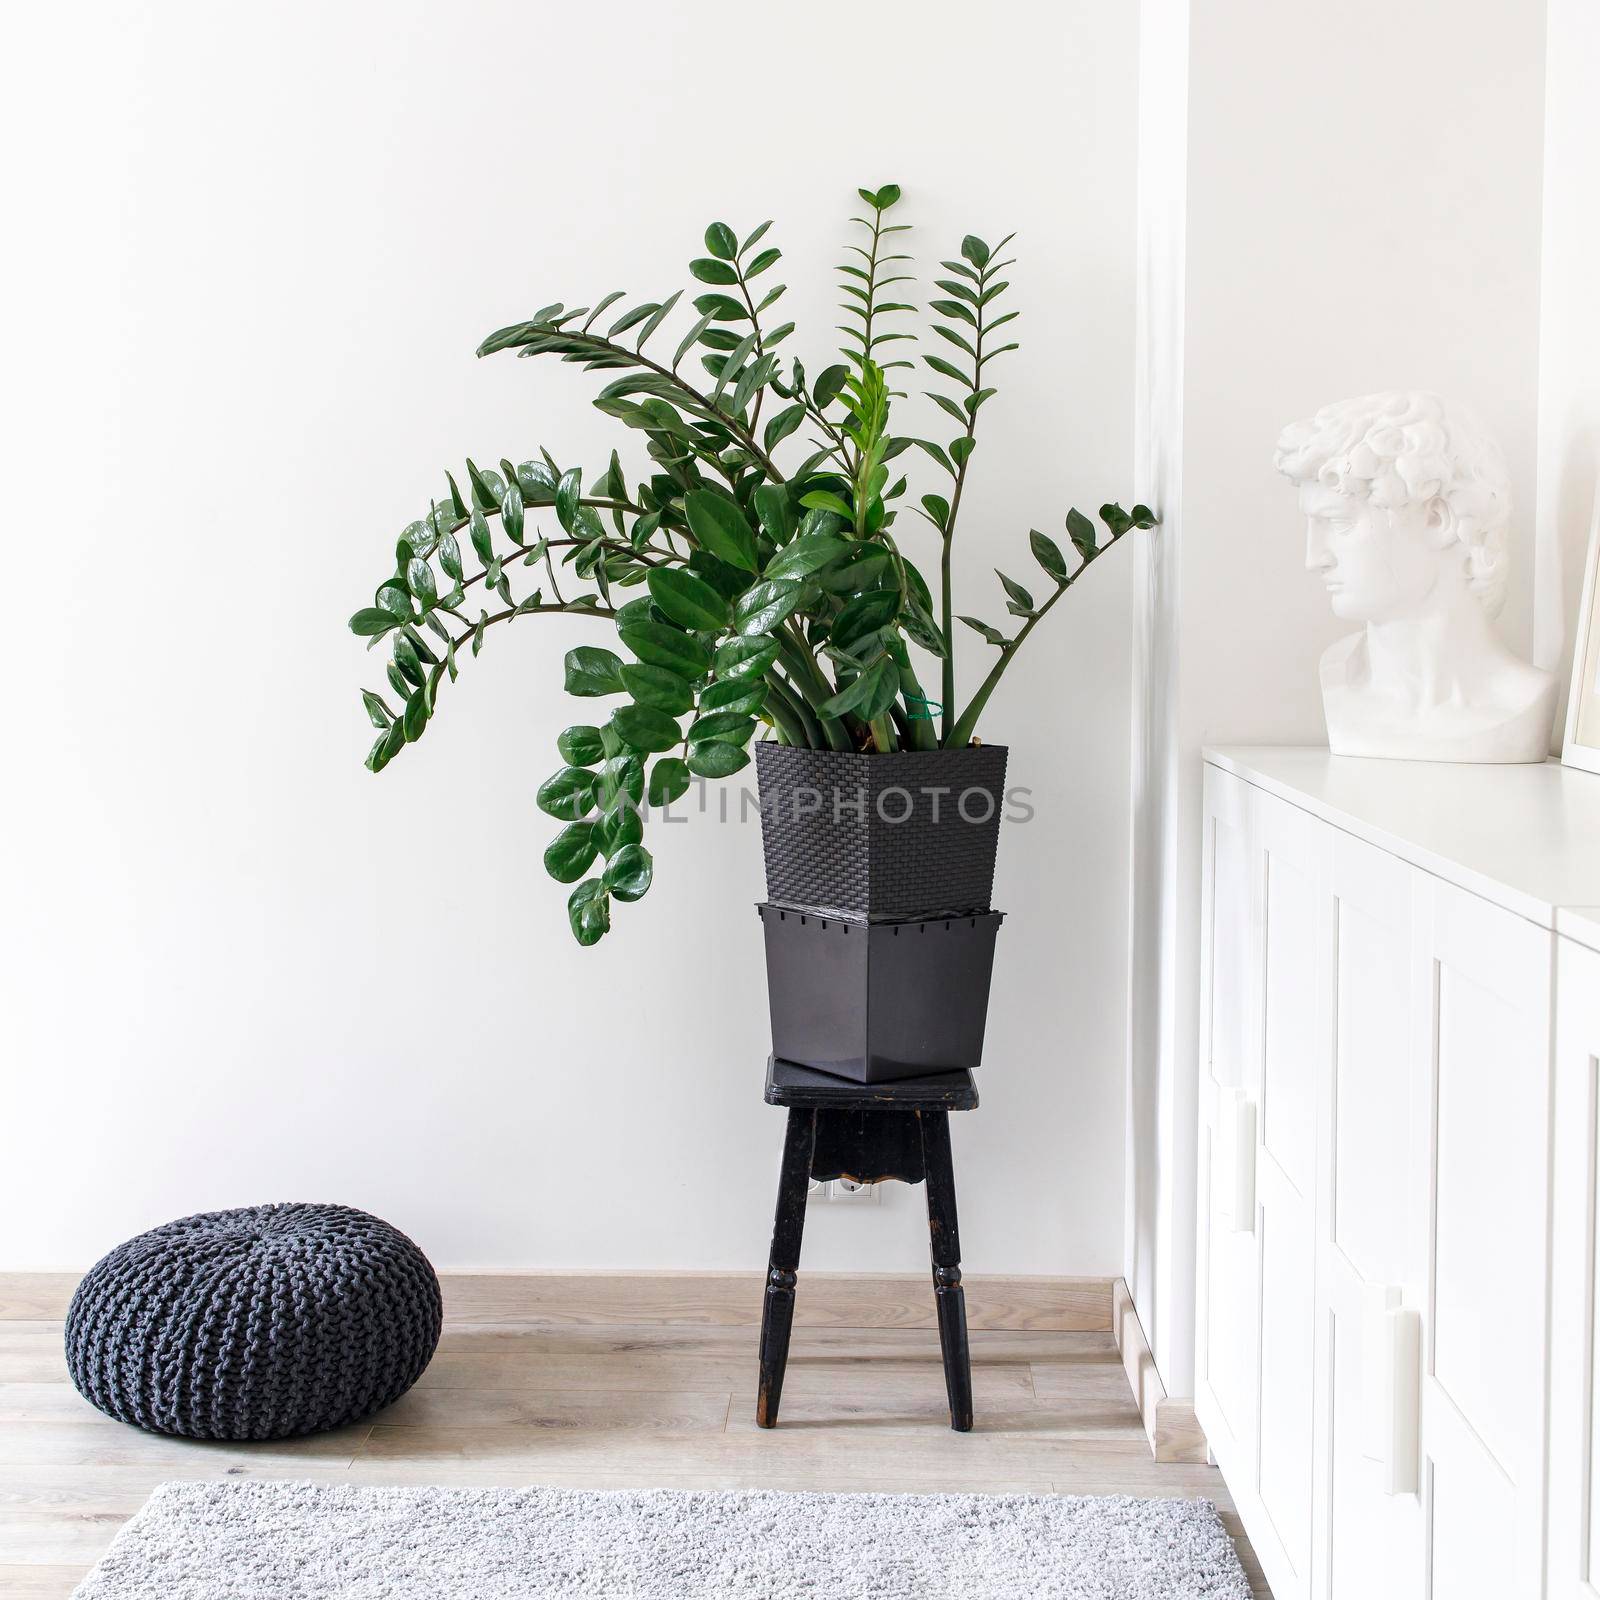 Scandinavian style room interior in white tones. A chest of drawers with a photo frame, a large indoor Zamioculcas flower on a stool in the corner, a gray curpet and a black knitted pouffe. by elenarostunova